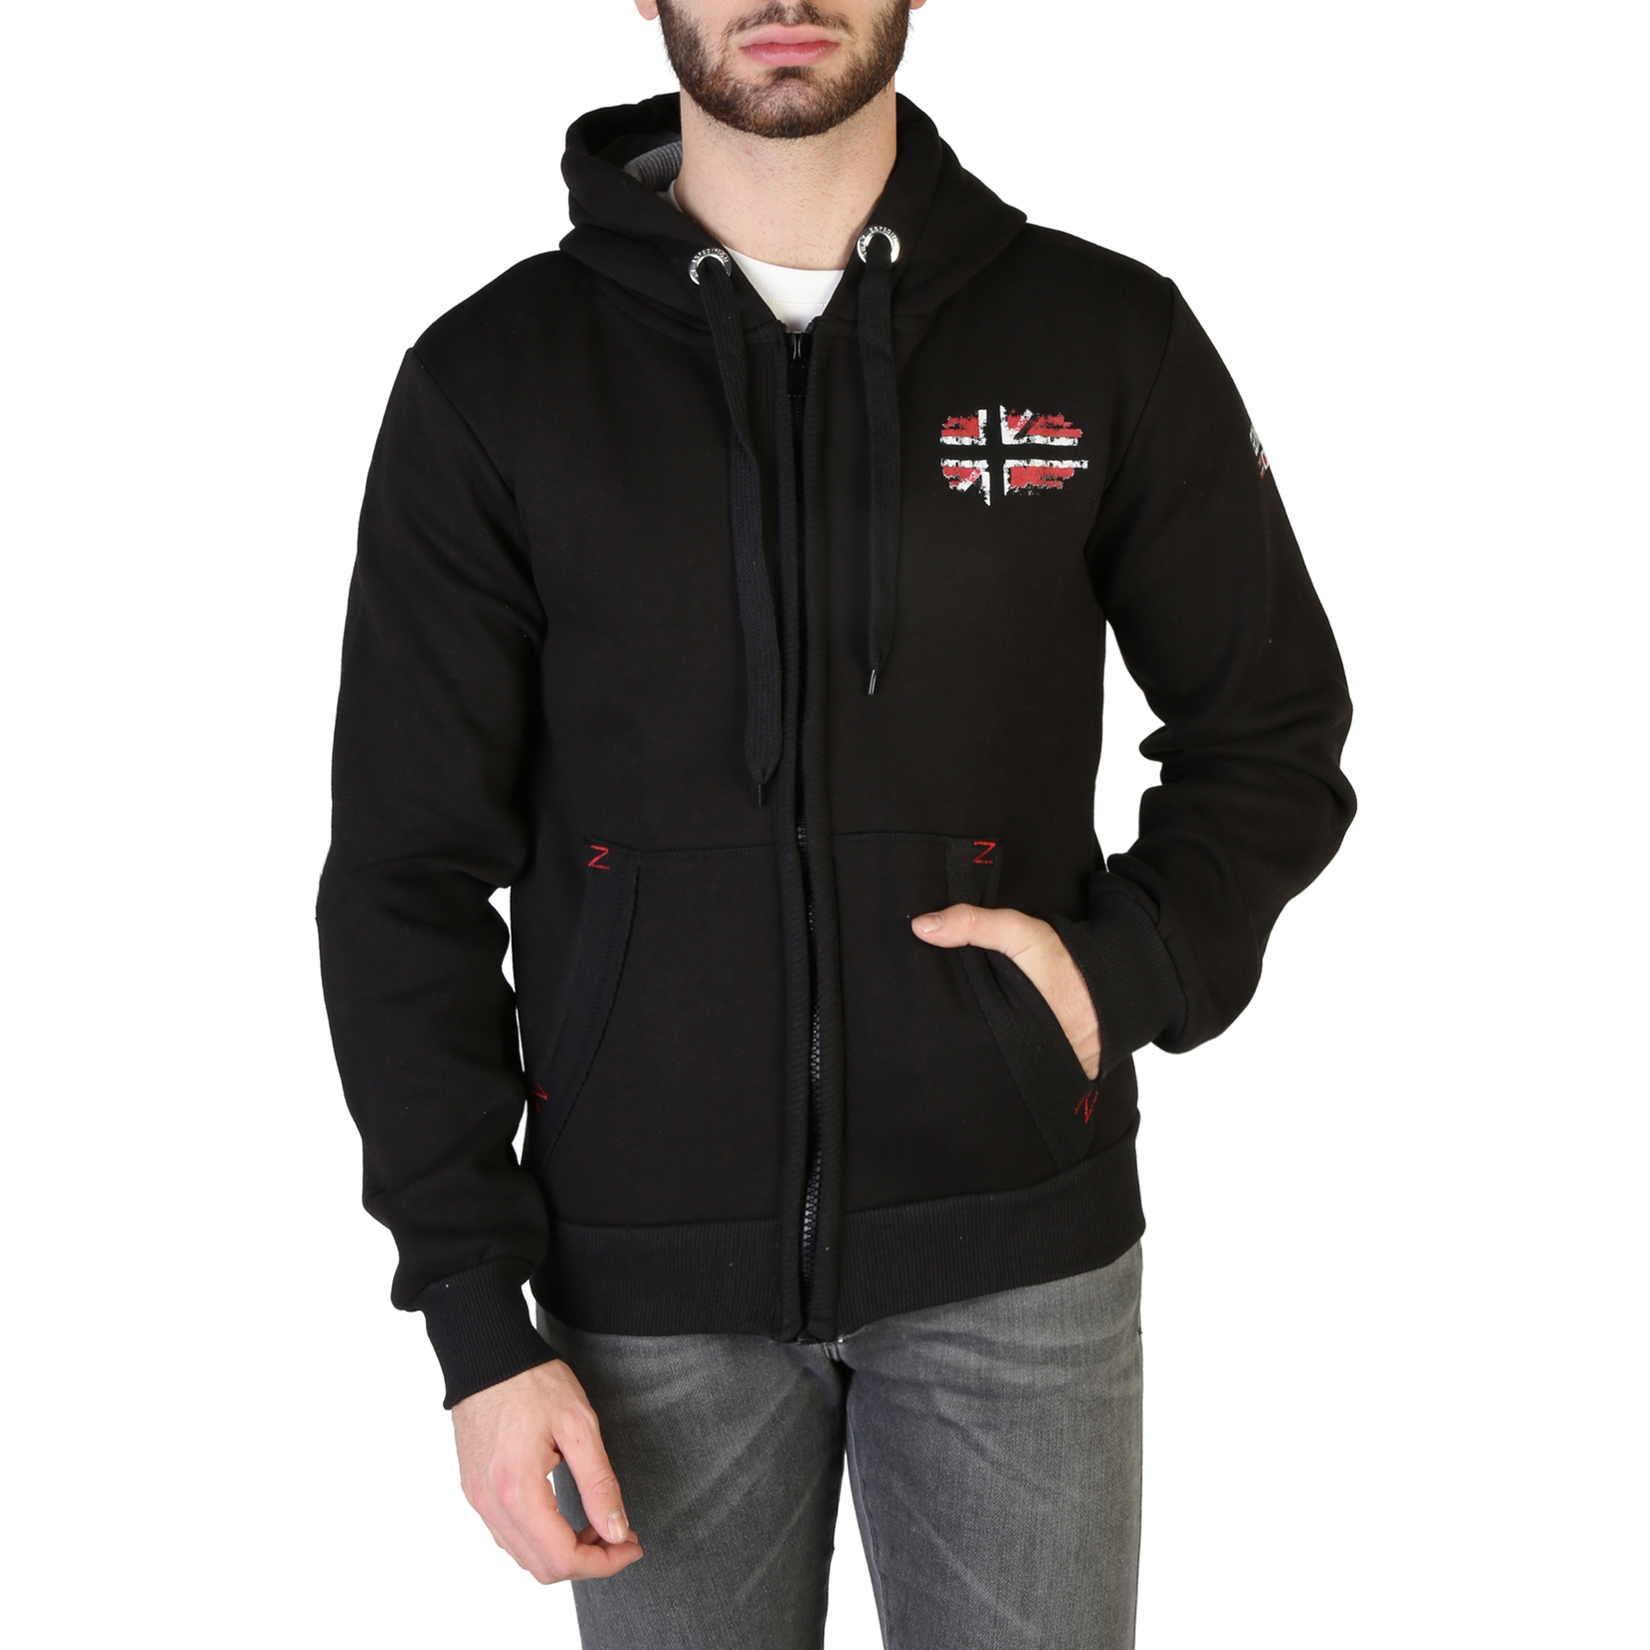 Geographical Norway Glacier100 man